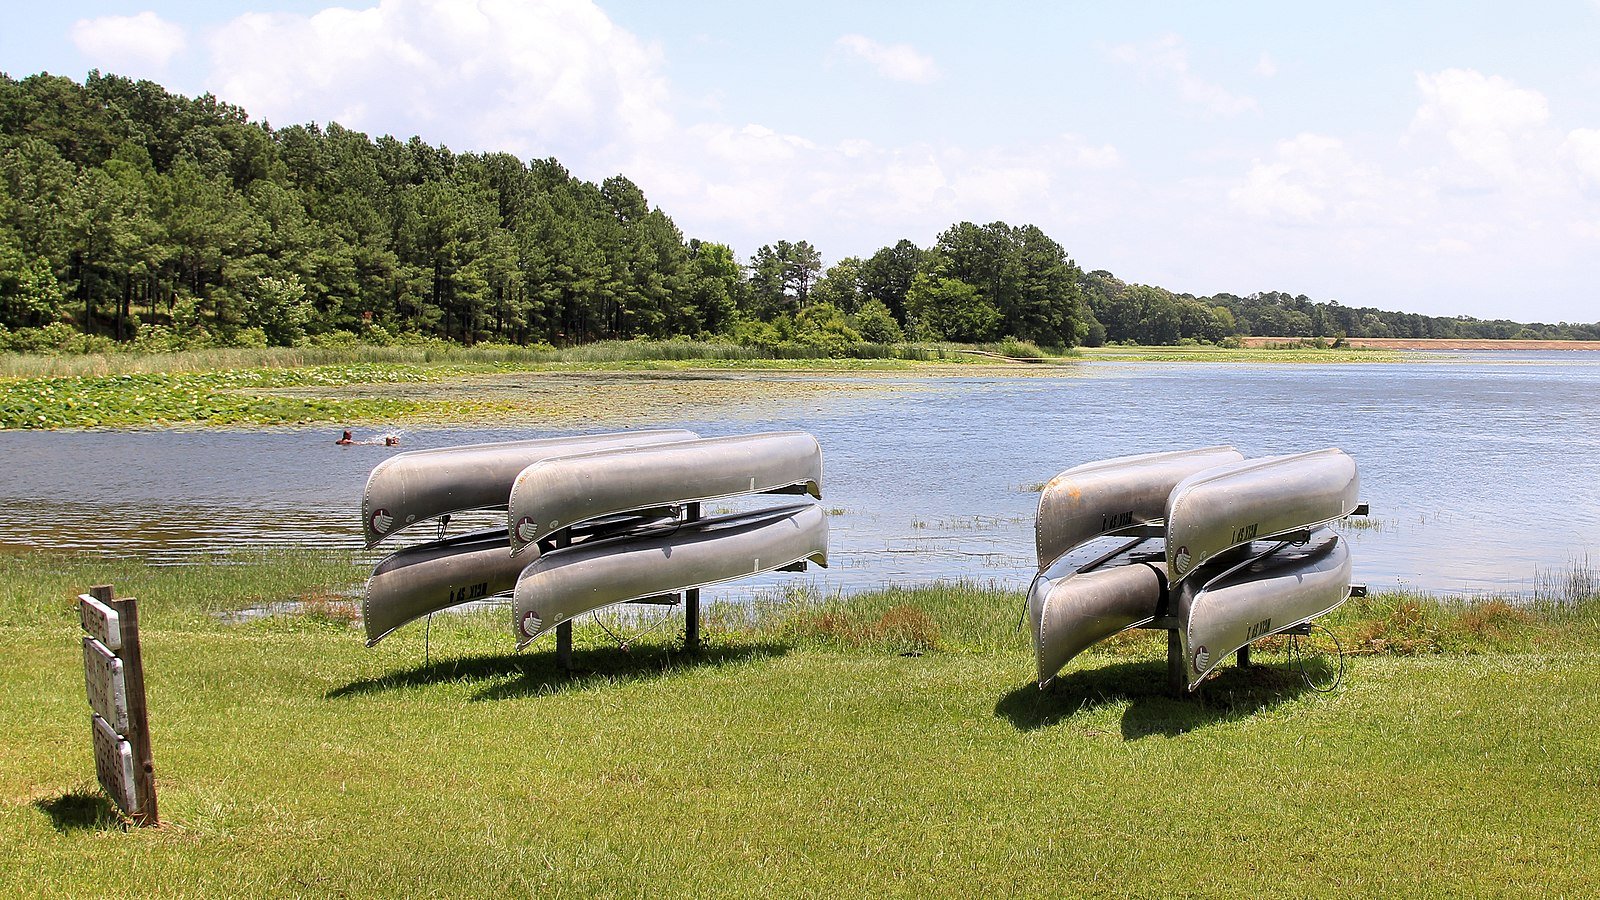 The state park at Martin Creek Lake has canoes available for rent